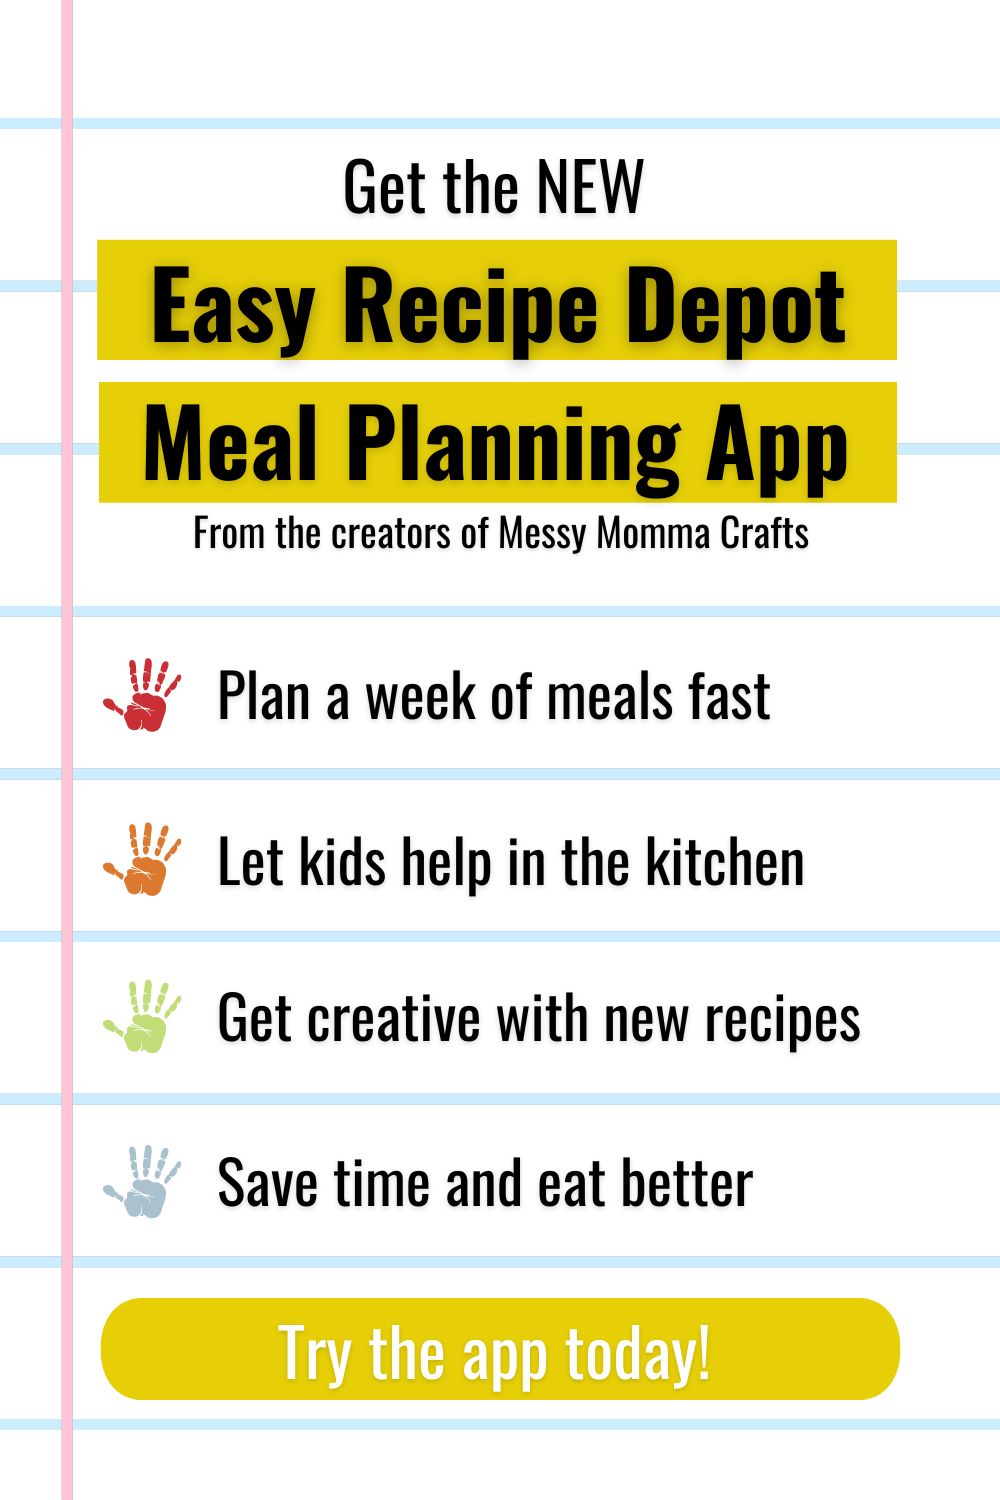 Get the new Easy Recipe Depot meal planning app from the creators of Messy Momma Crafts.